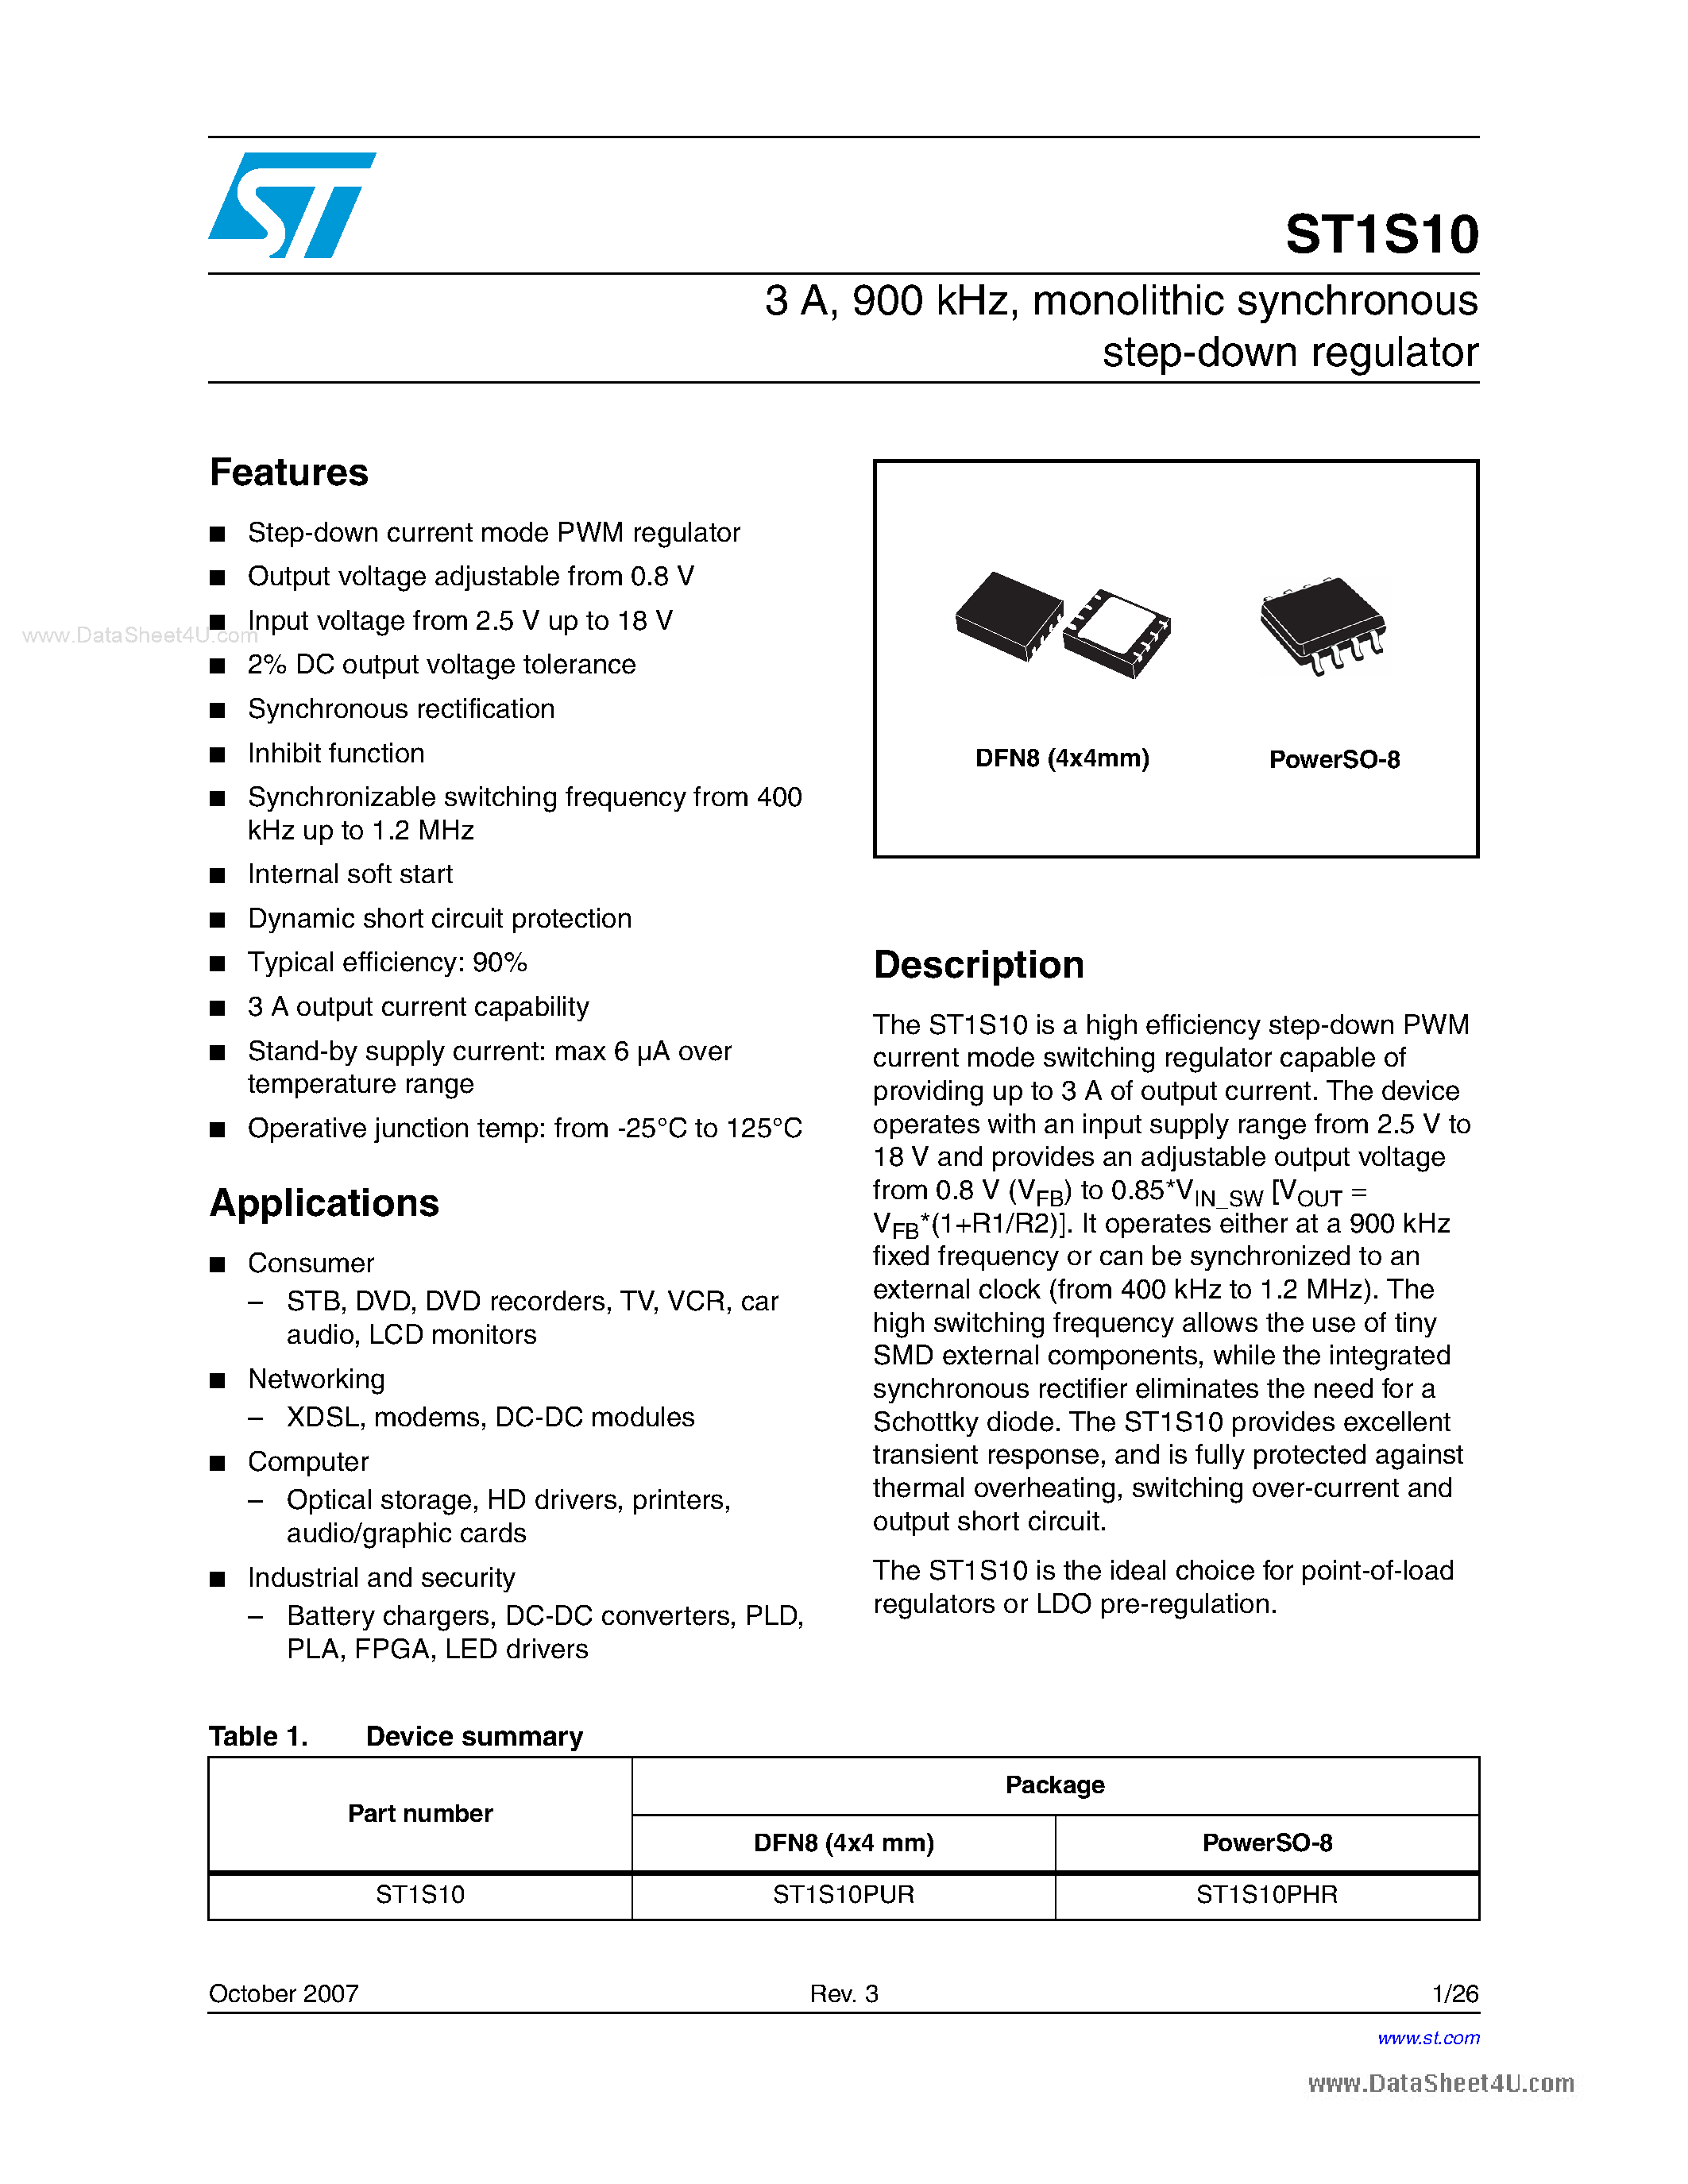 Datasheet ST1S10 - monolithic synchronous step-down regulator page 1